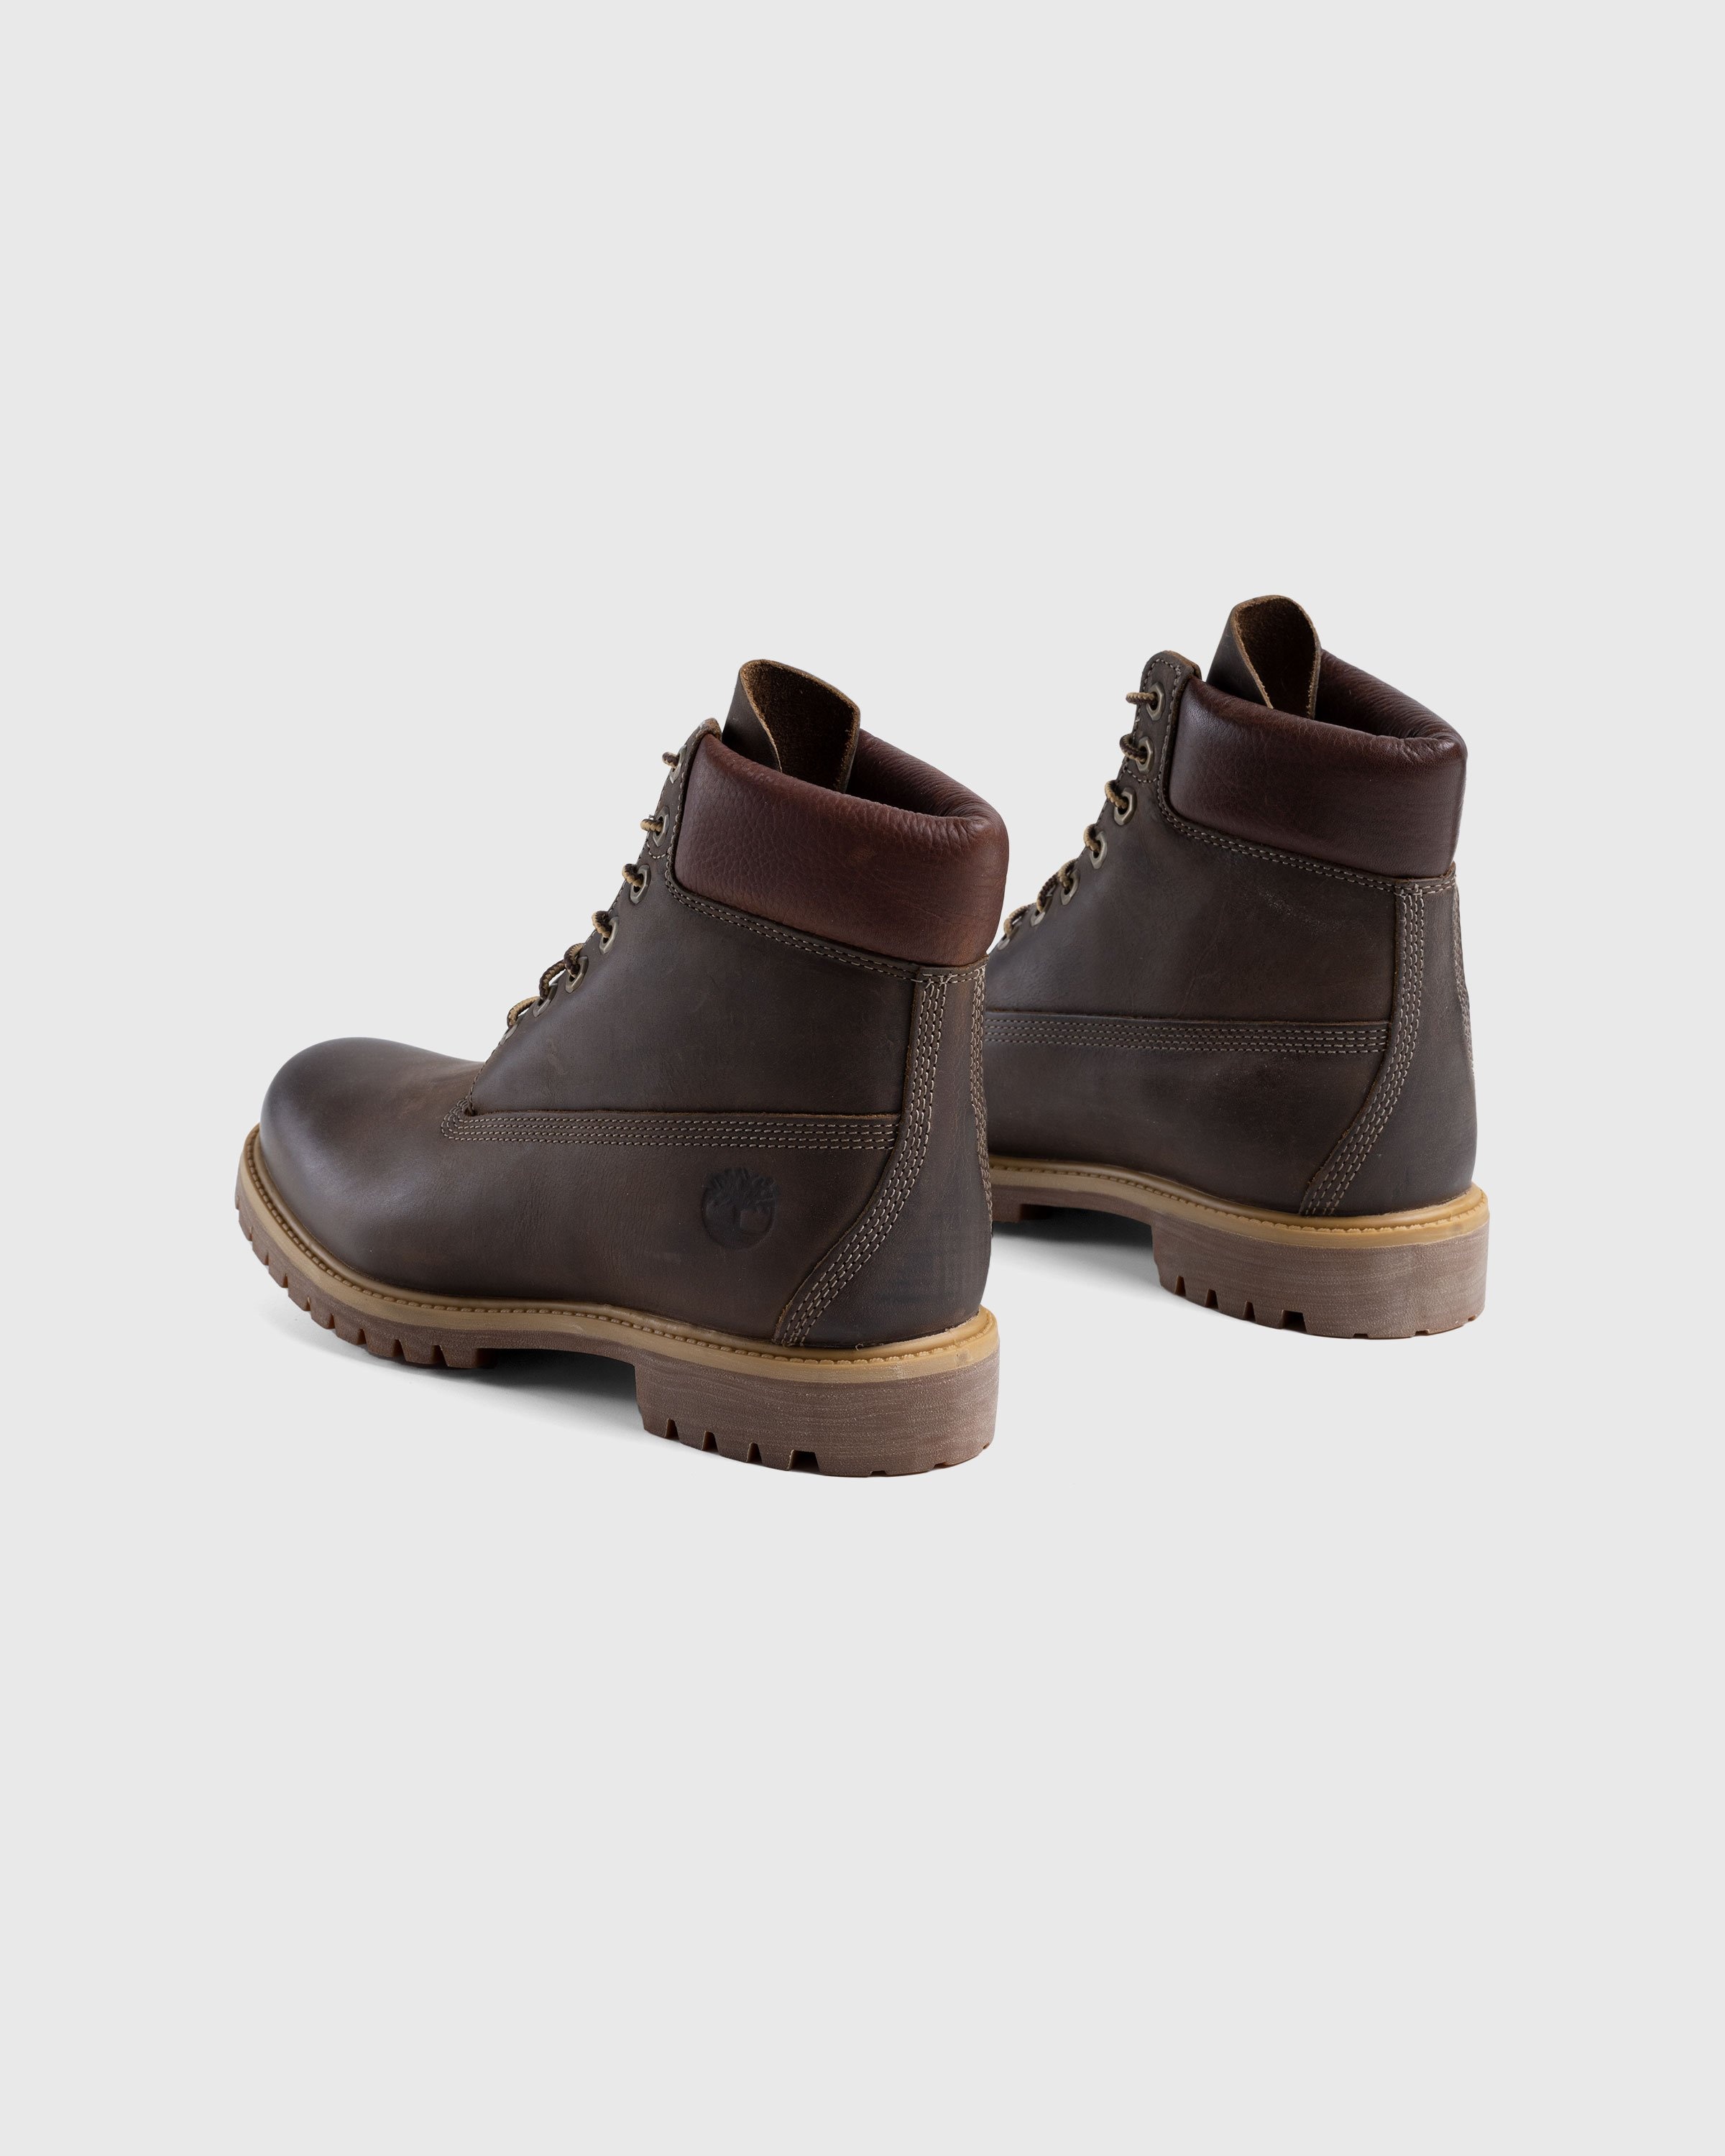 Timberland – Heritage 6 in Premium Brown - Laced Up Boots - Brown - Image 2